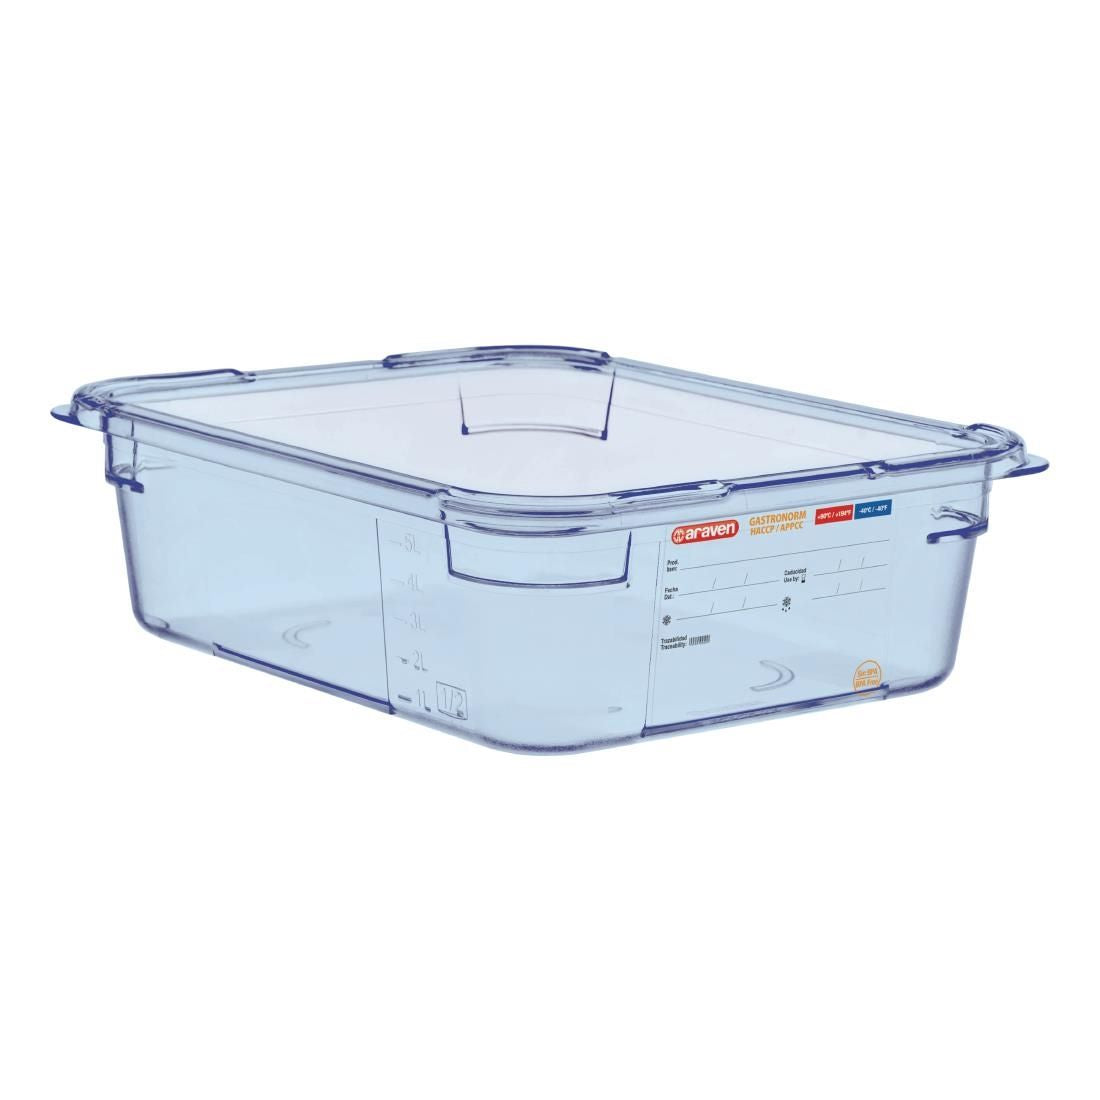 GP584 Araven ABS Food Storage Container Blue GN 1/2 100mm JD Catering Equipment Solutions Ltd